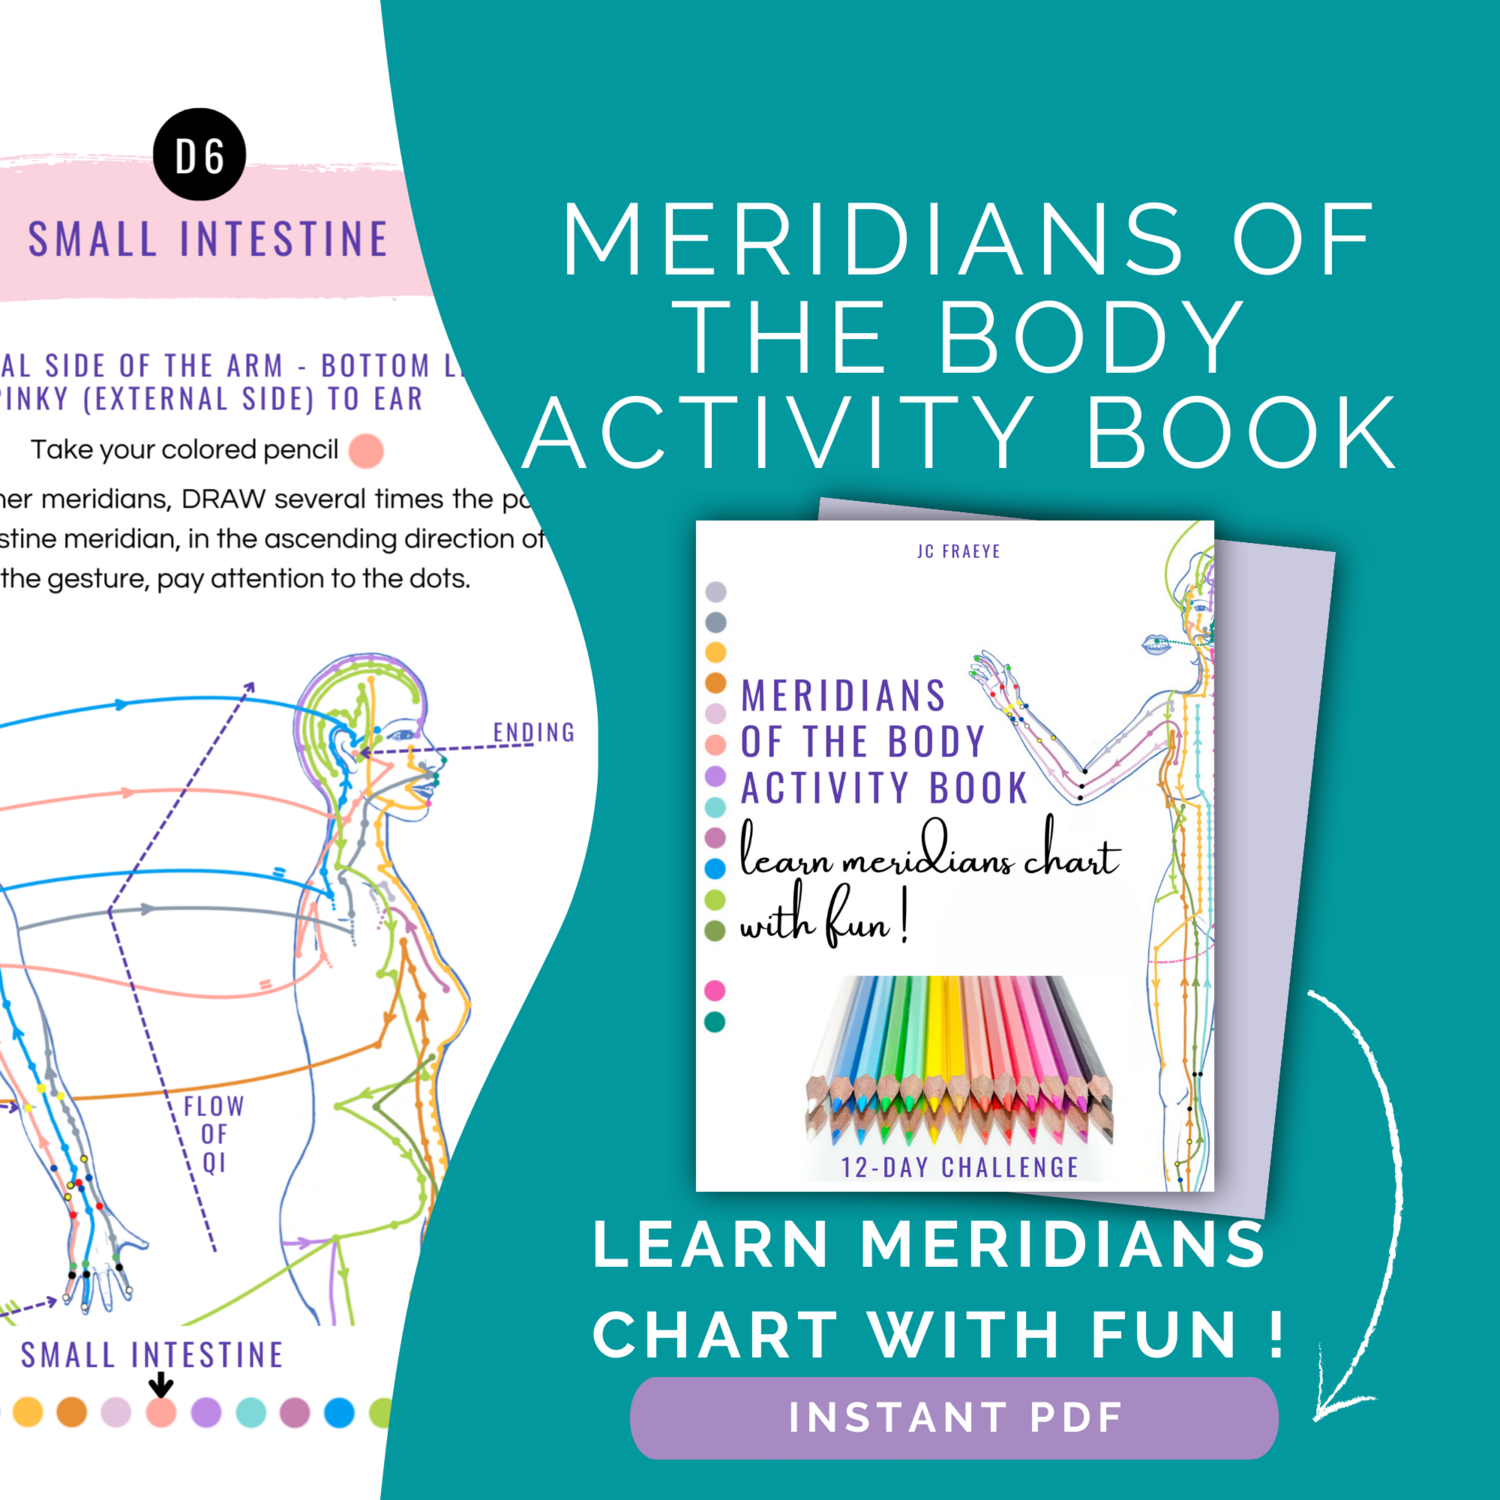 [PDF] MERIDIANS OF THE BODY ACTIVITY BOOK